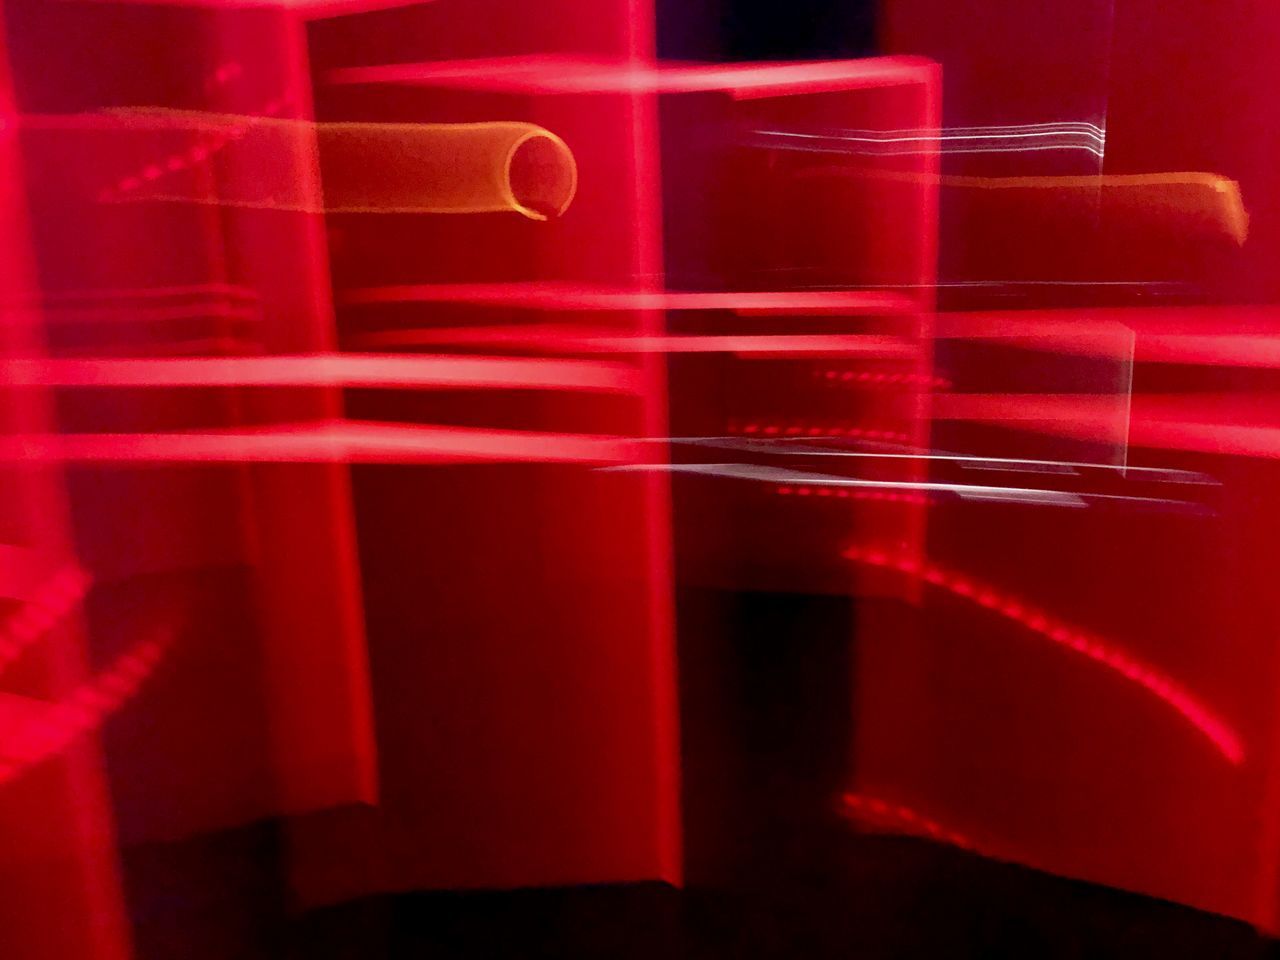 CLOSE-UP OF RED WINE GLASS WITH LIGHTS